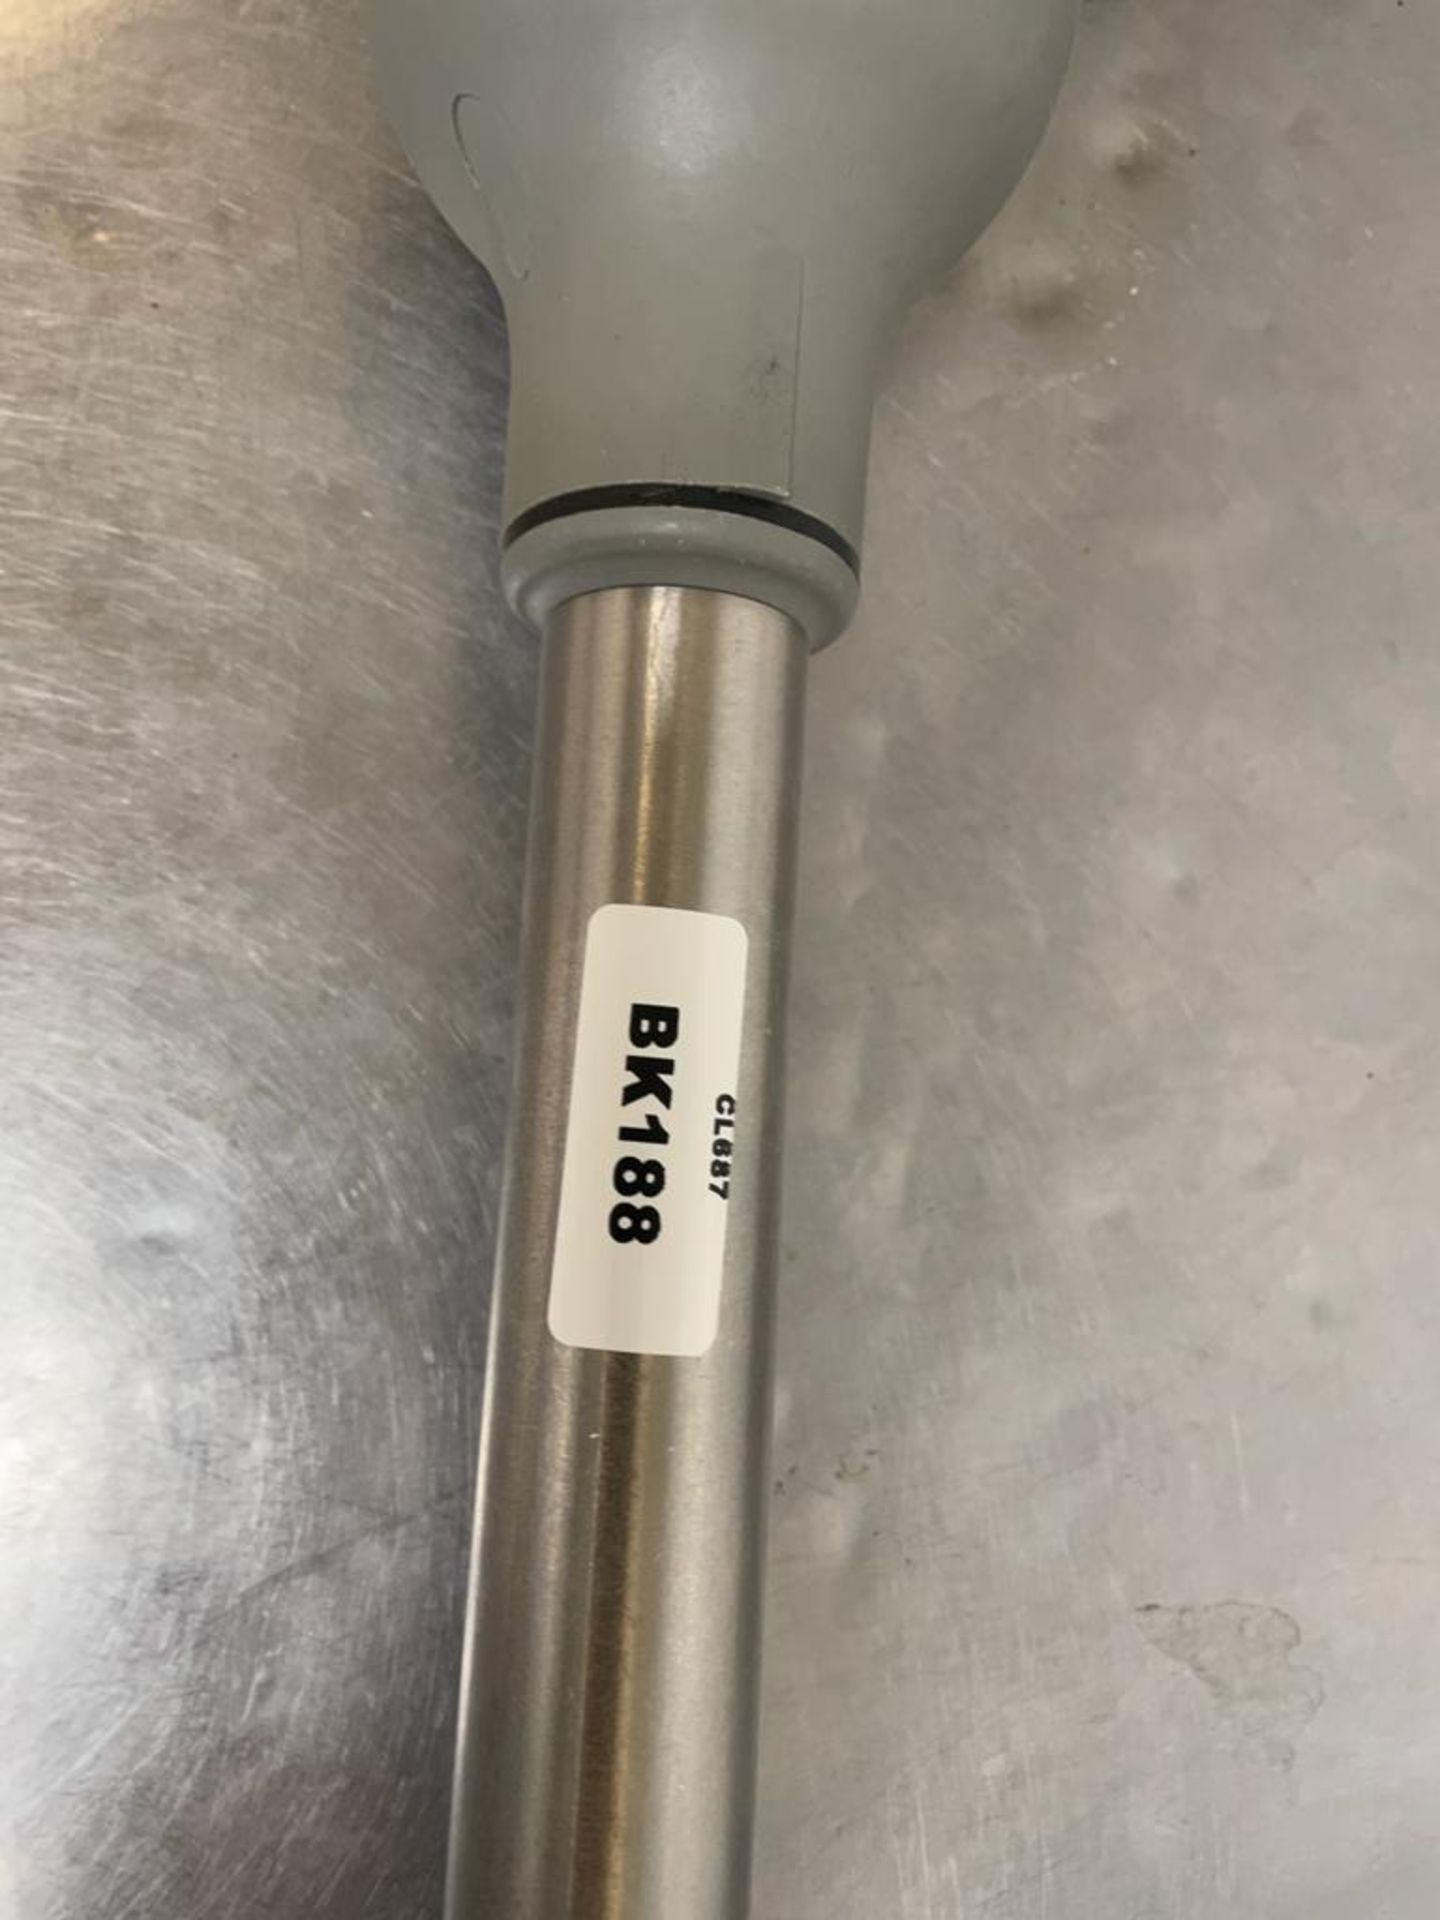 1 x Sirman Variable Speed Ciclone 360 Stick Blender - RRP £360 - Ref: BK188 - CL686 - Location: - Image 5 of 6